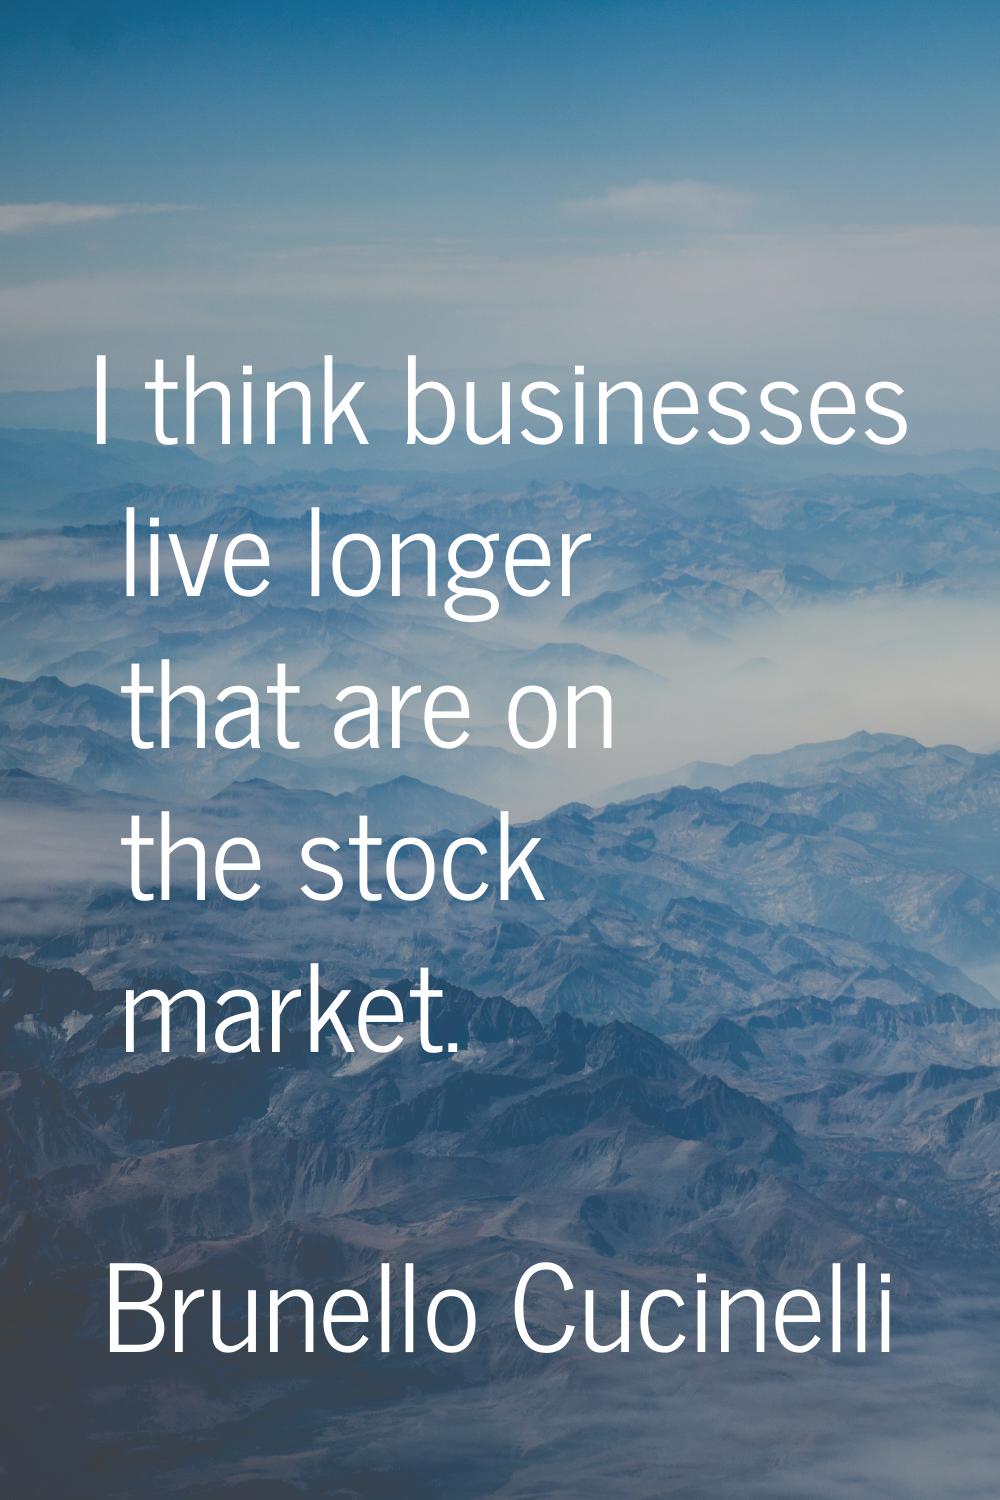 I think businesses live longer that are on the stock market.